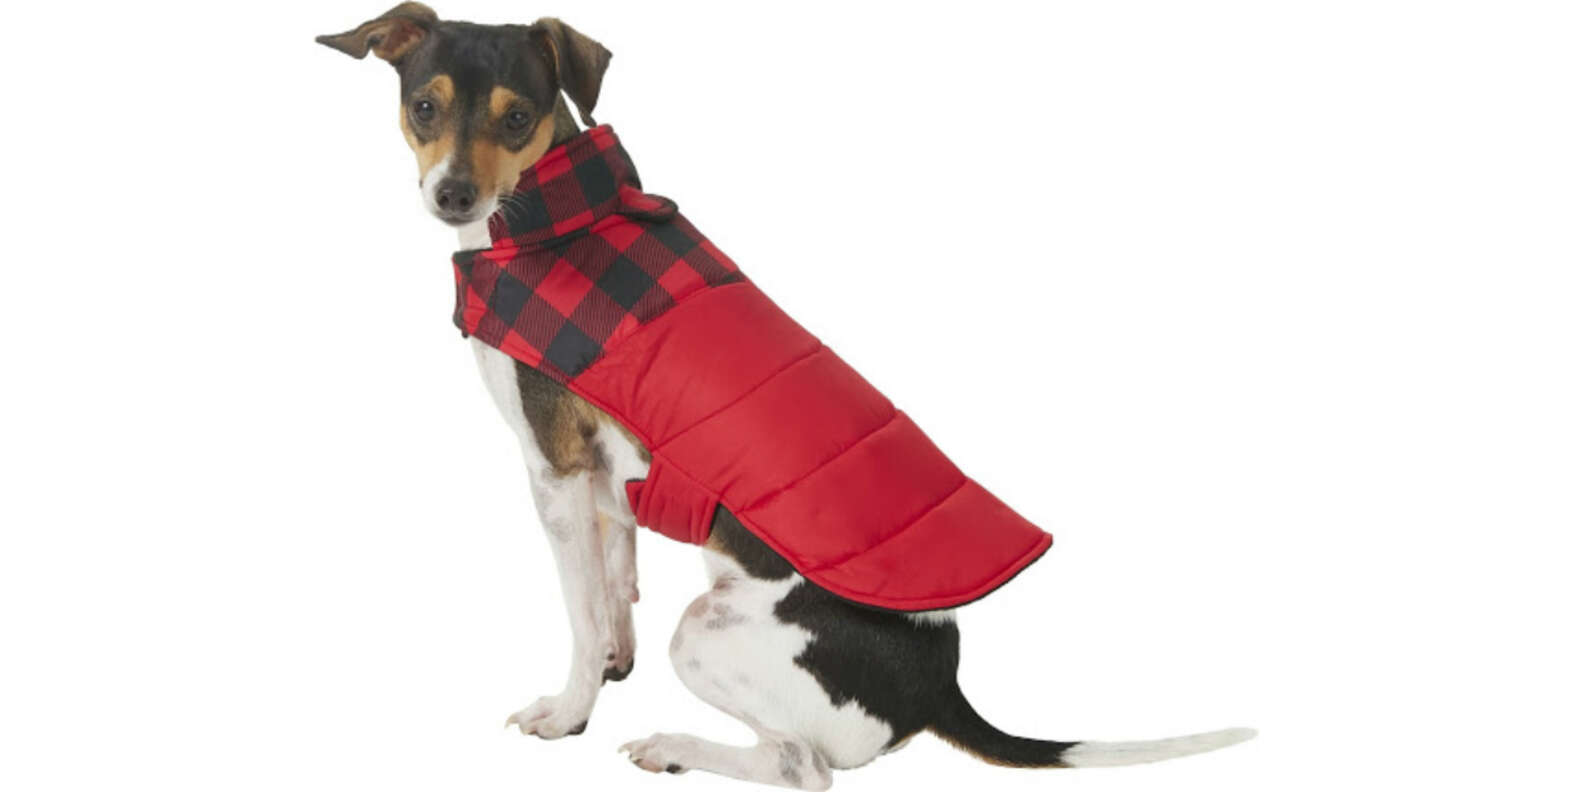 Fall Dog Coats Your Pup Will Love Wearing - DodoWell - The Dodo